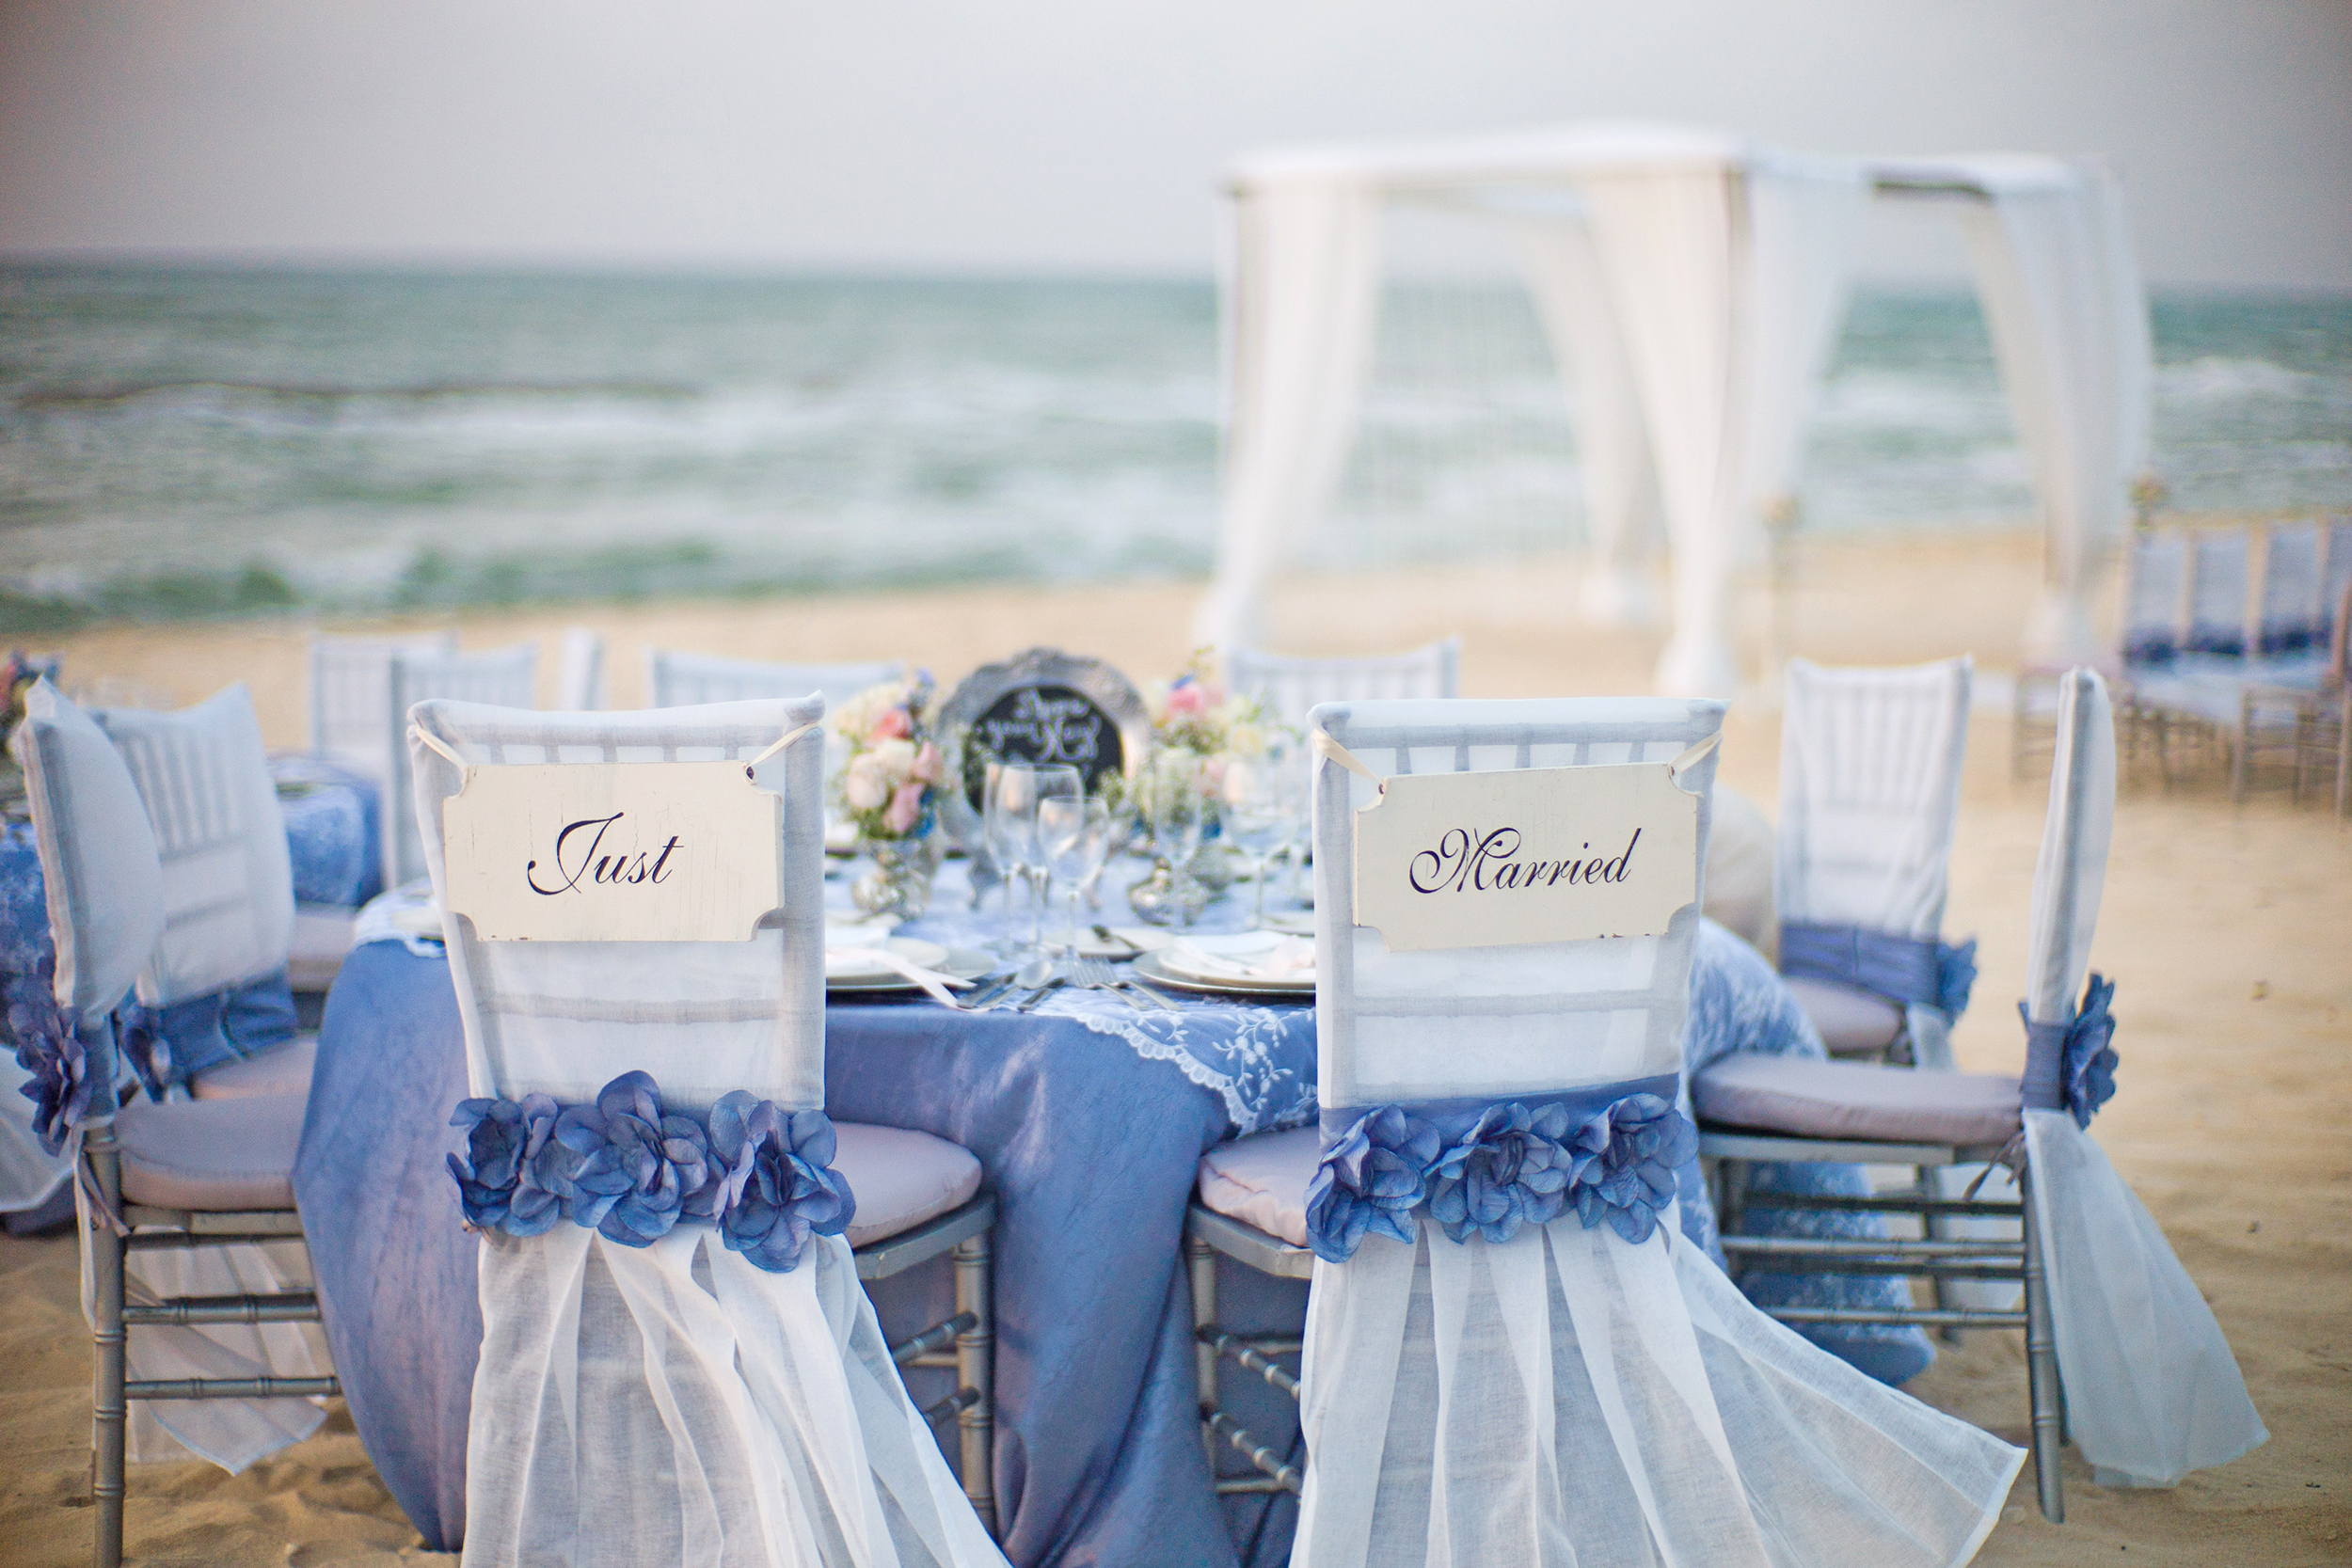 Vintage Elegance Ceremony with Chair Signs and Ceremony.jpg